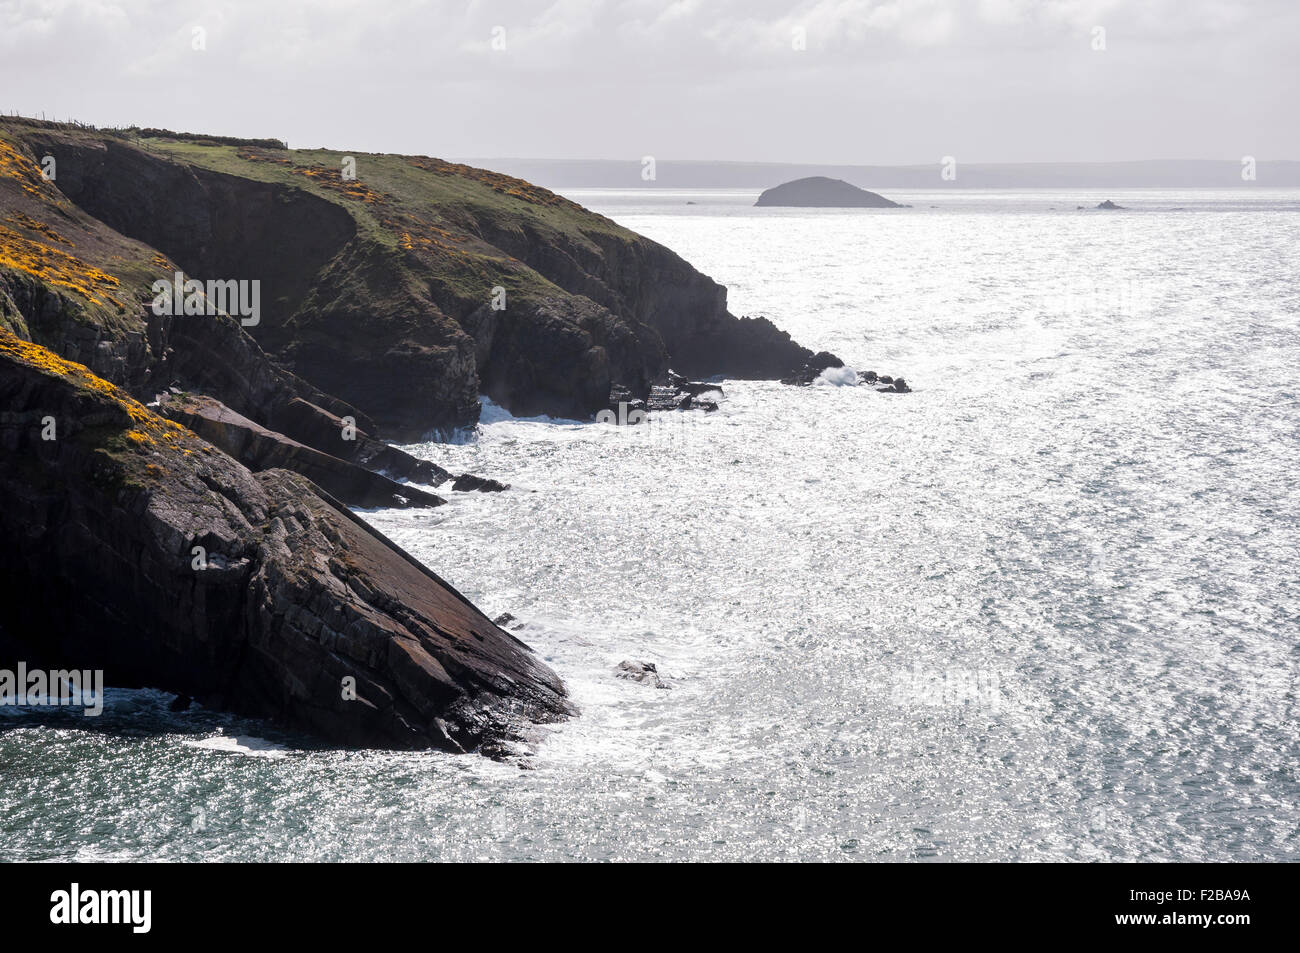 Beautiful view of sunlight sparkling off the sea at Caer bwdy bay near ...